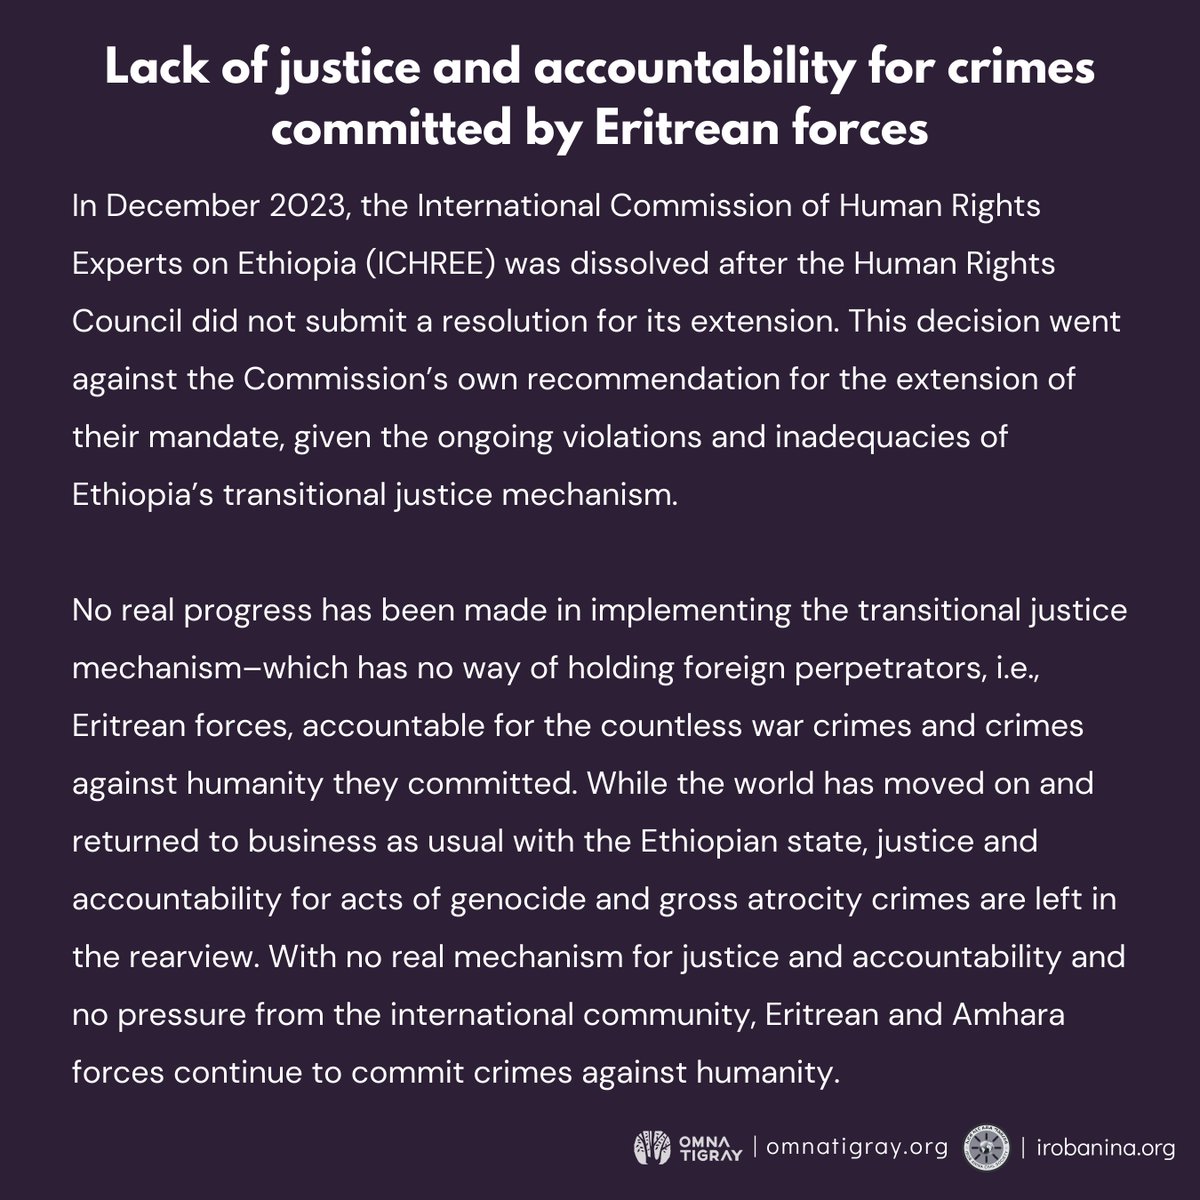 In Dec 2023, @UN_HRC's #ICHREE was dissolved. Since then, significant progress hasn't been made in implementing Ethiopia's transitional justice mechanism–which has no way of holding Eritrean forces accountable for countless war crimes and crimes against humanity. #Justice4Tigray